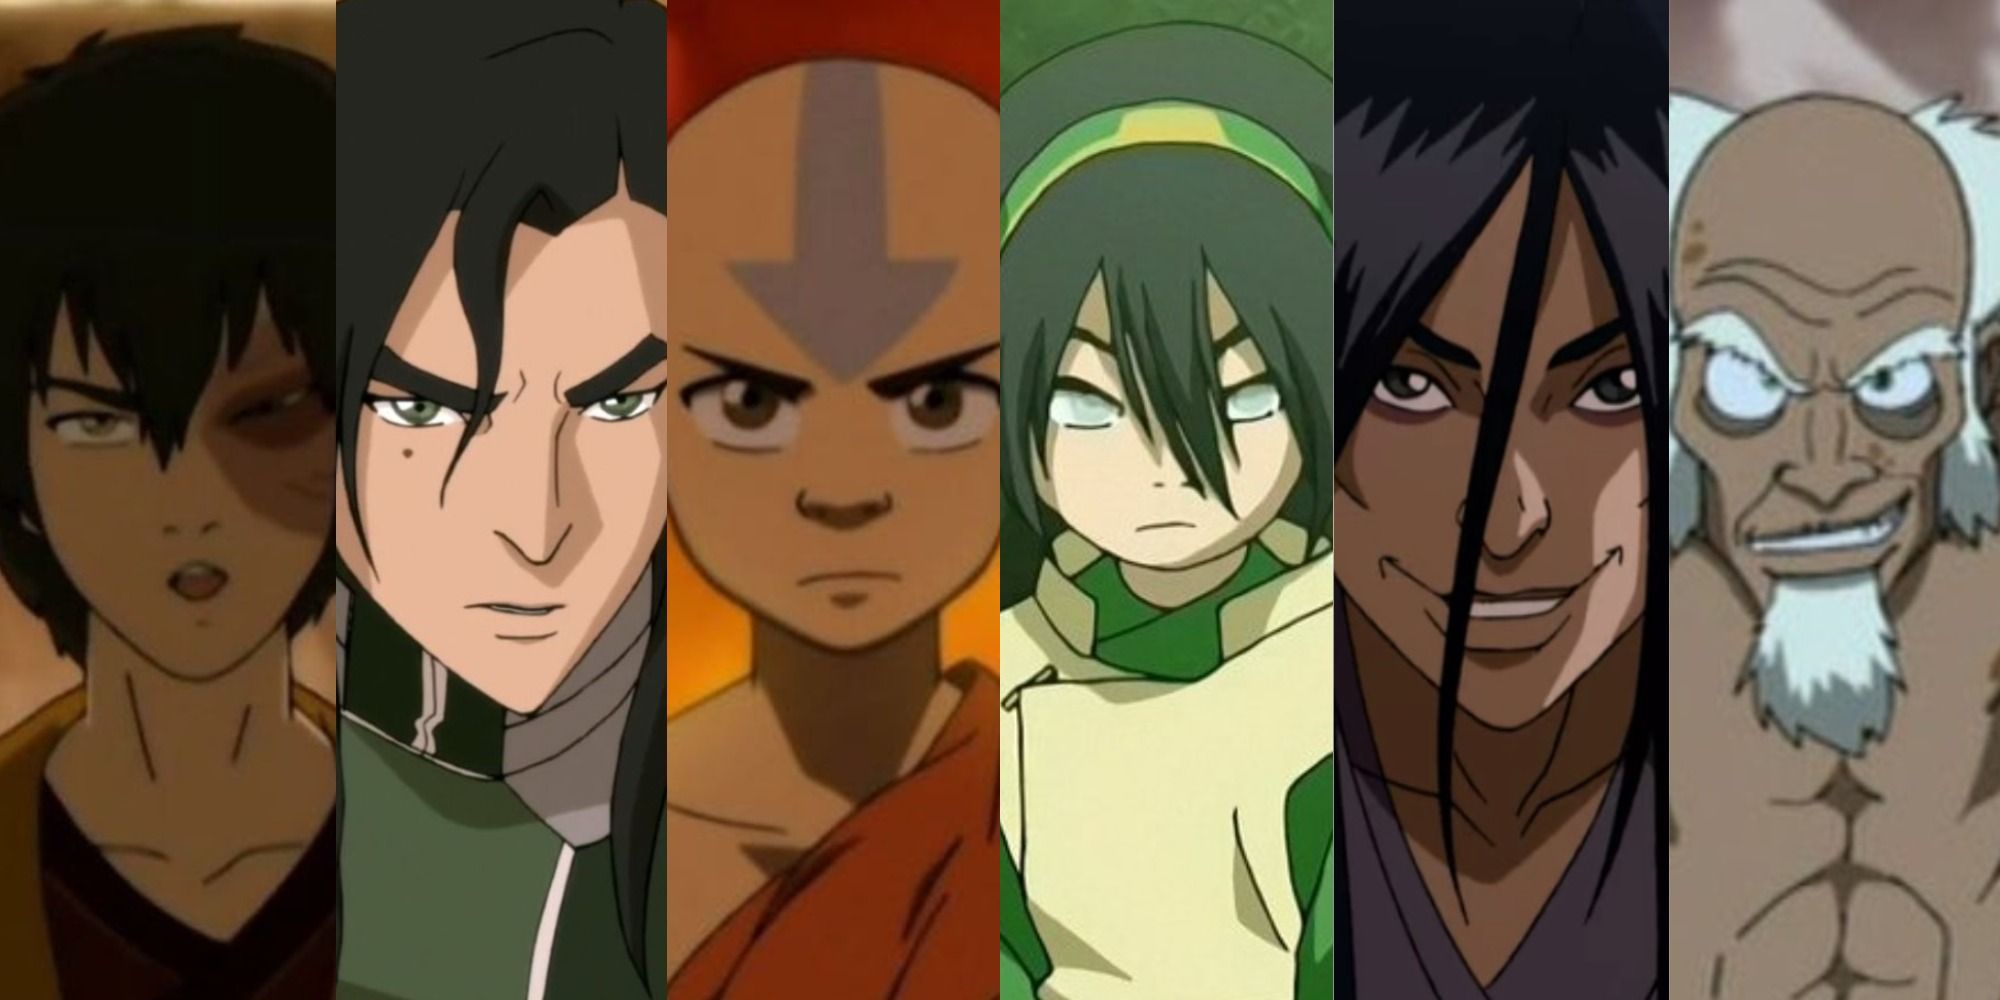 A collage of the faces of powerful benders from Avata the Last Airbender and The Legend of Korra